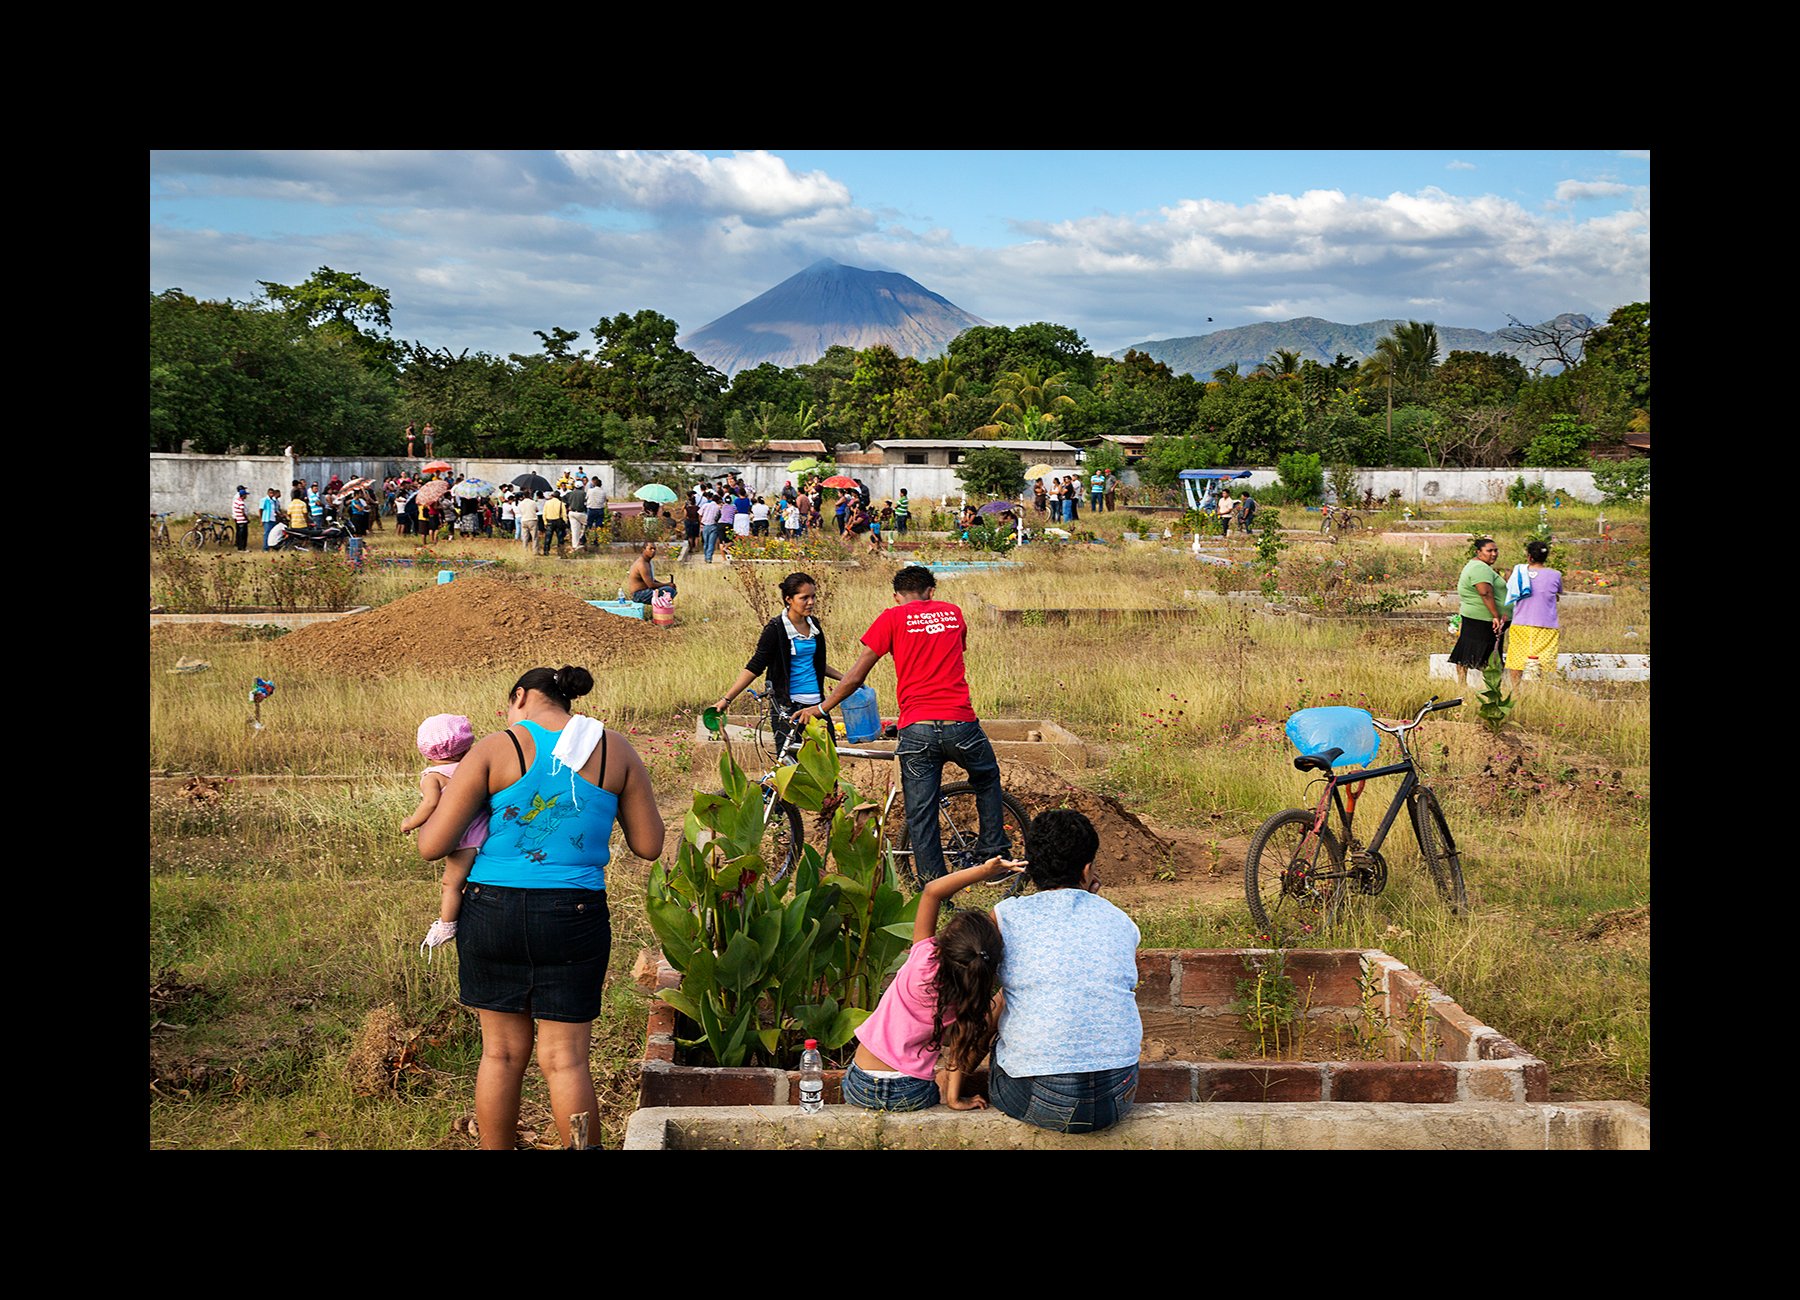  Locals gather at a cemetery where a funeral for two men who have died of chronic kidney disease are buried in Chichigalpa, Nicaragua on Jan. 6, 2013. 